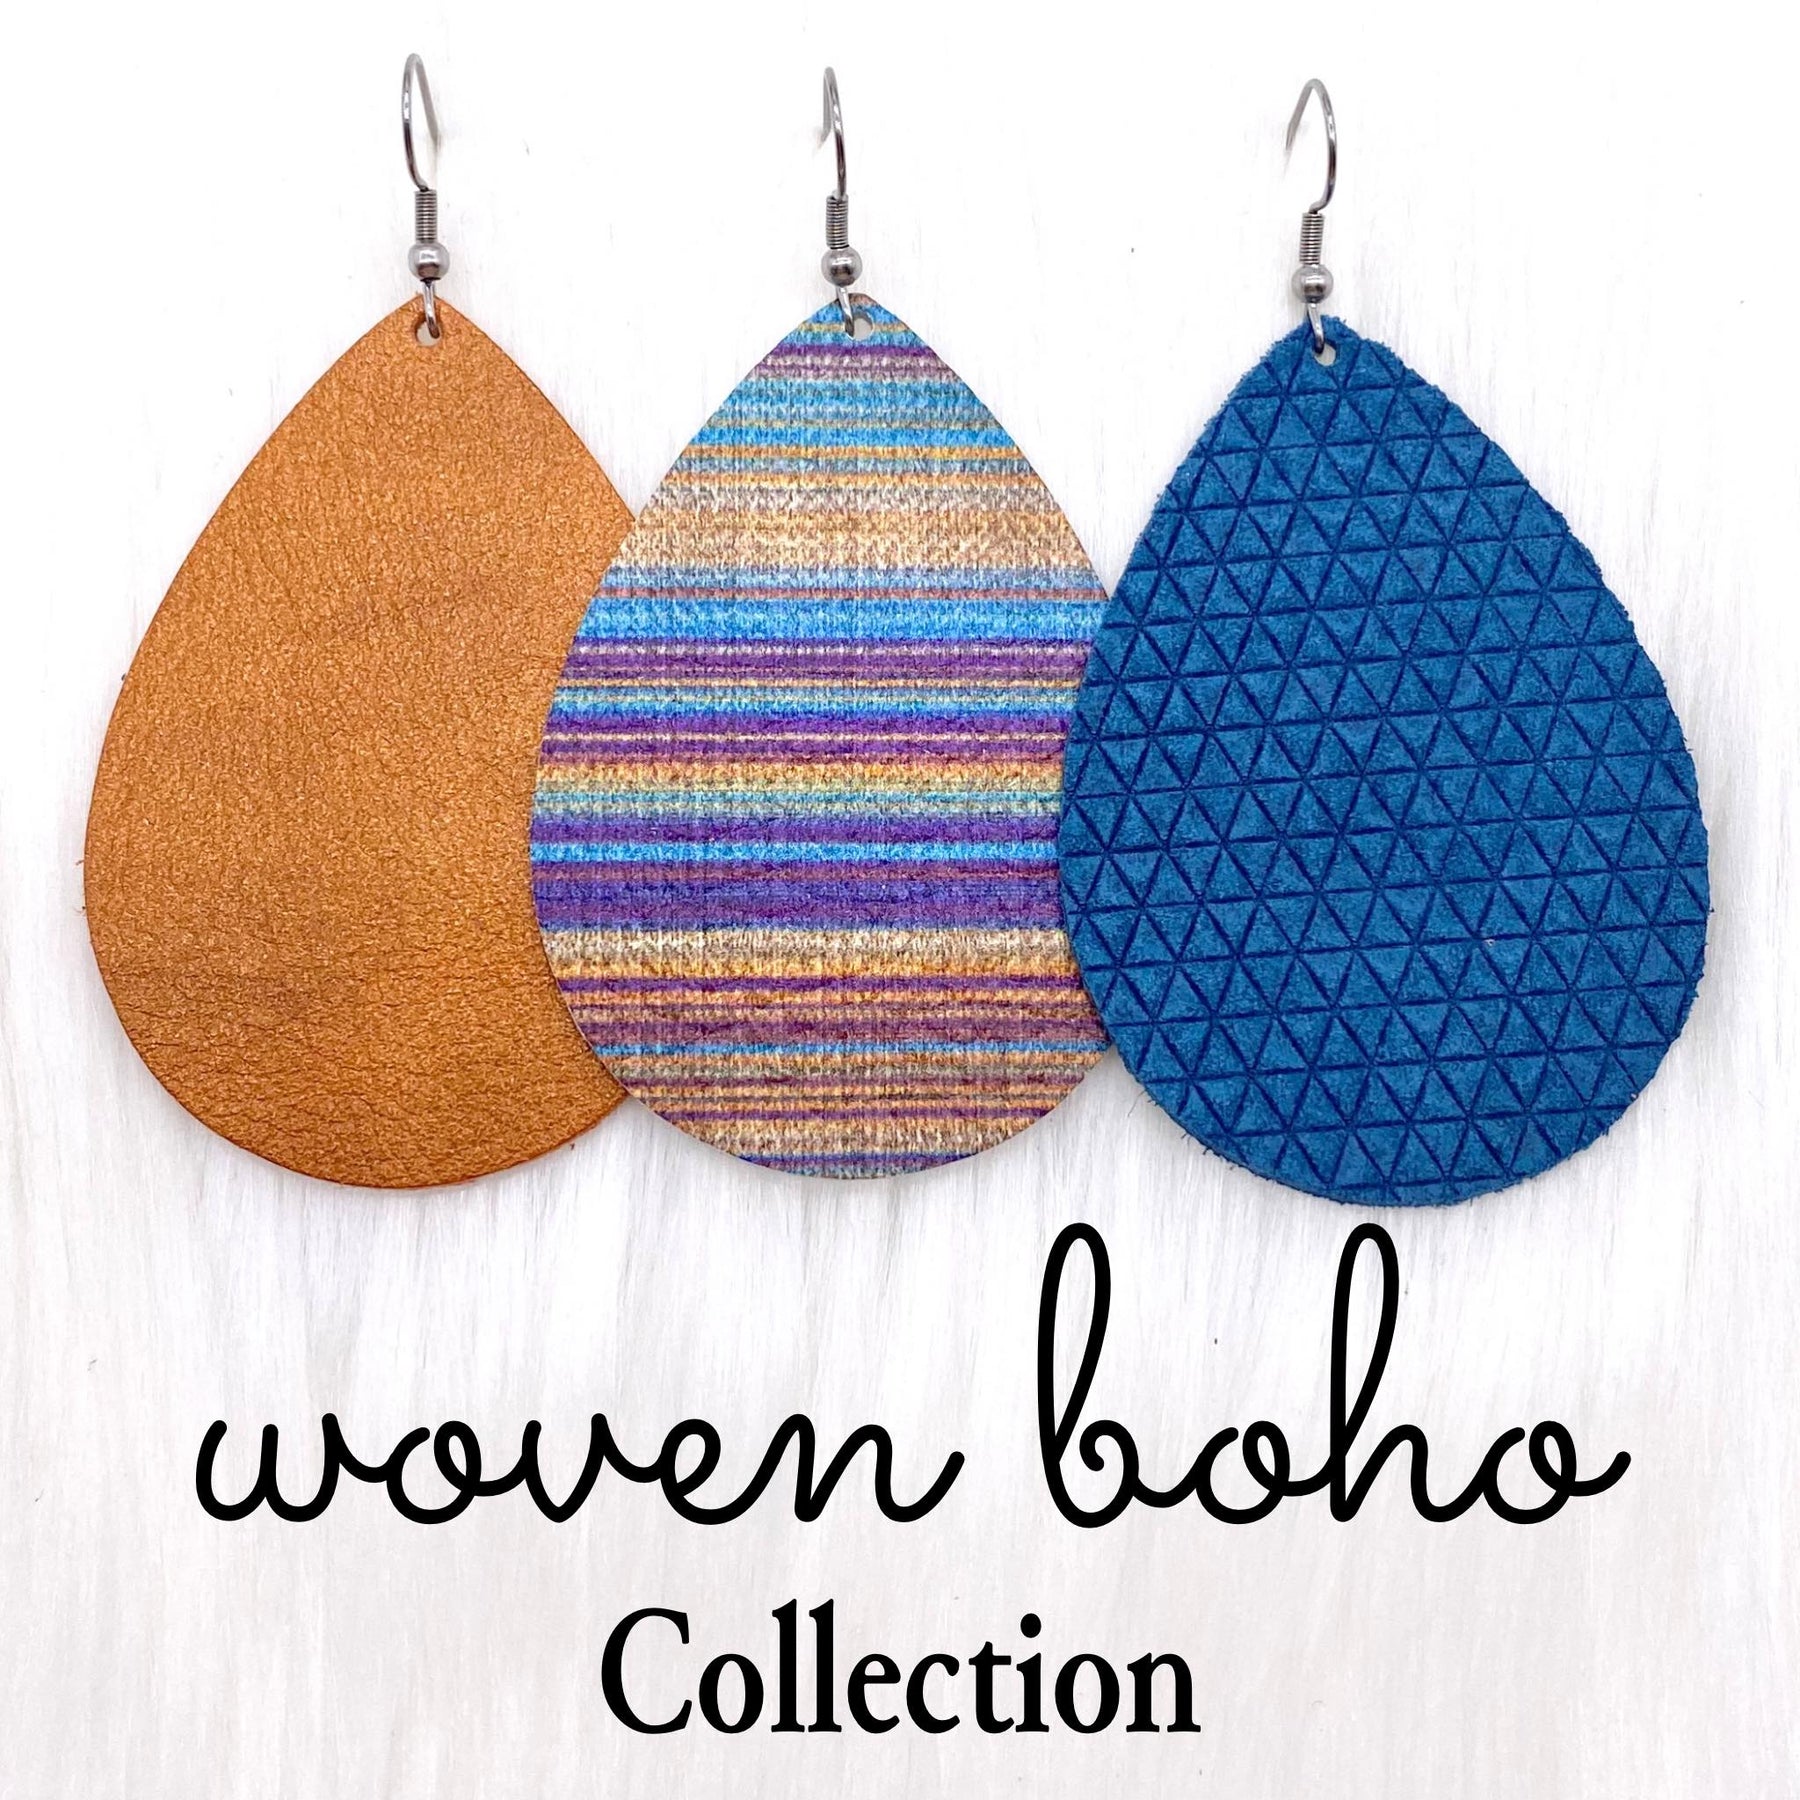 2.5" Woven Boho Mini Collection - Teal Triangles